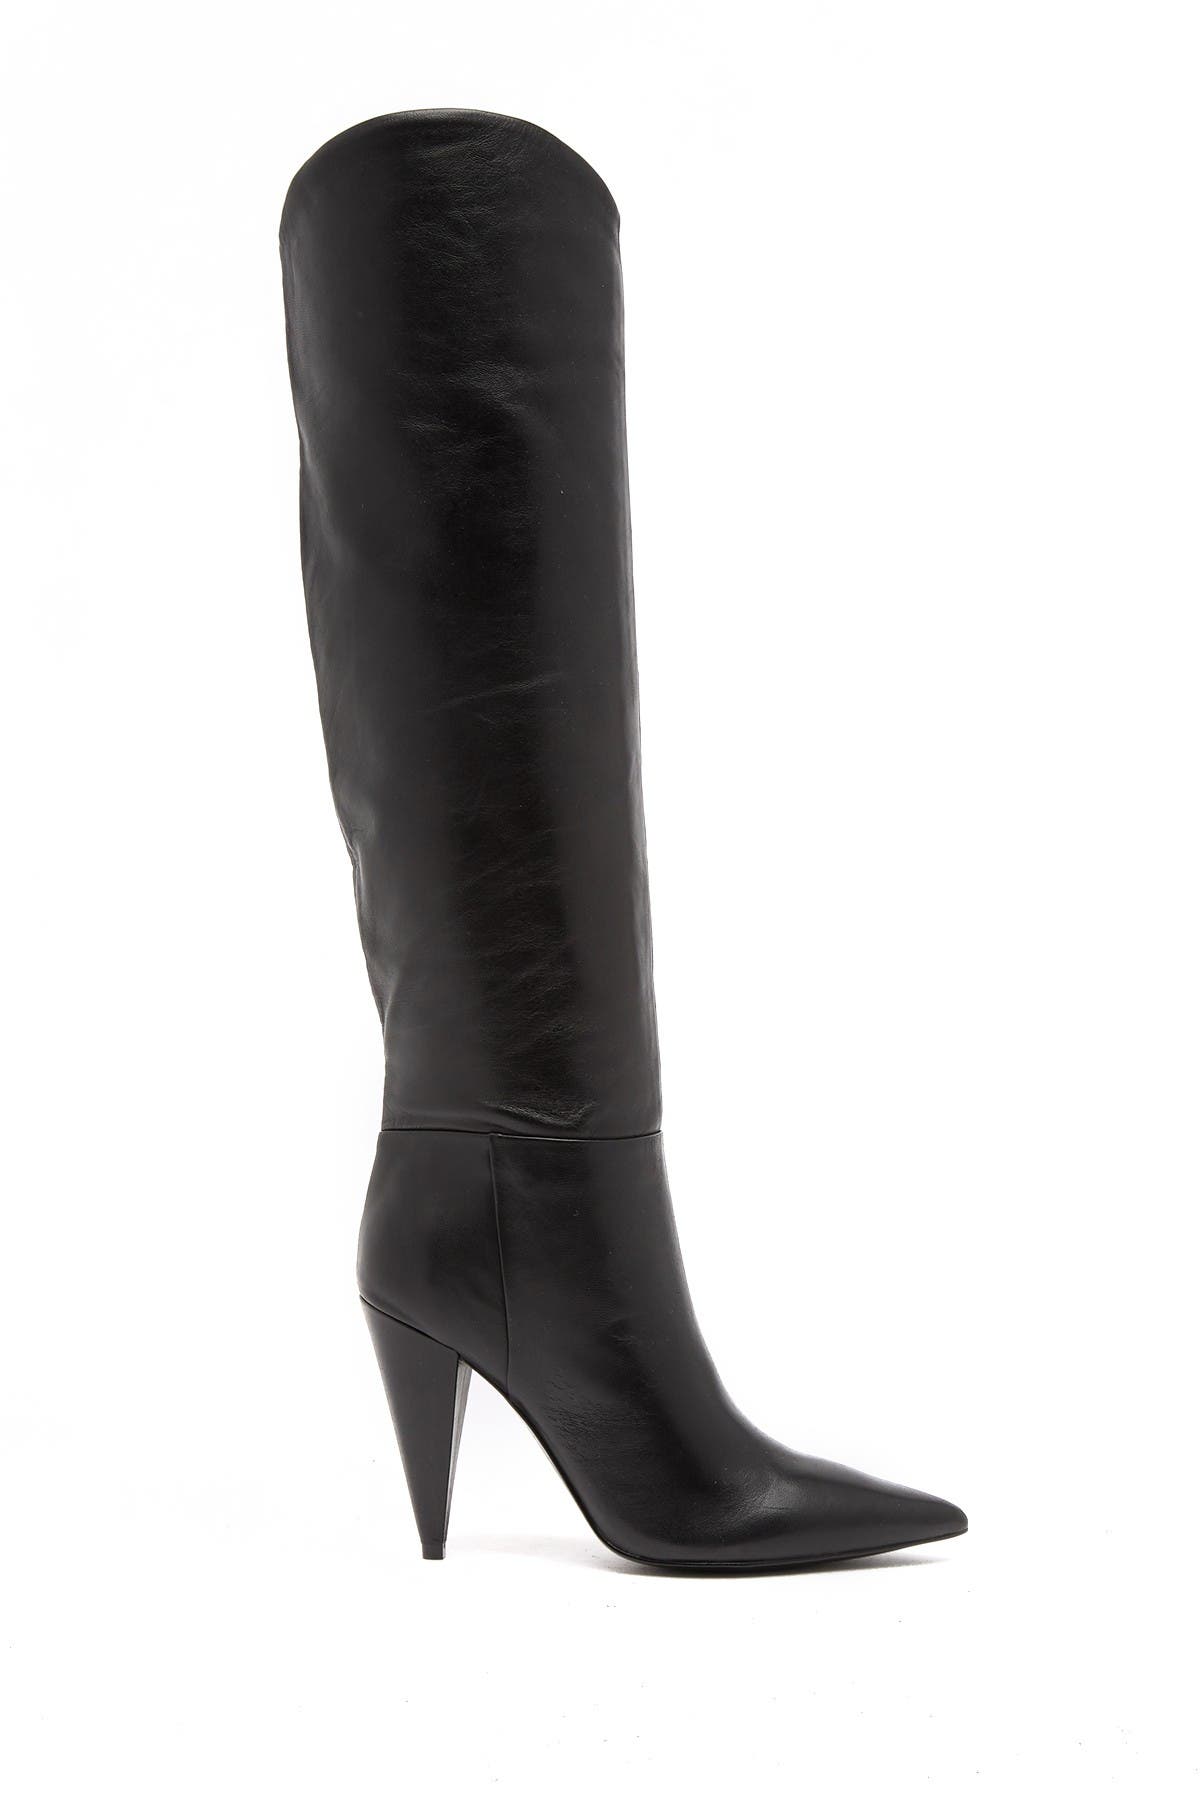 marc fisher hanny slouchy boot